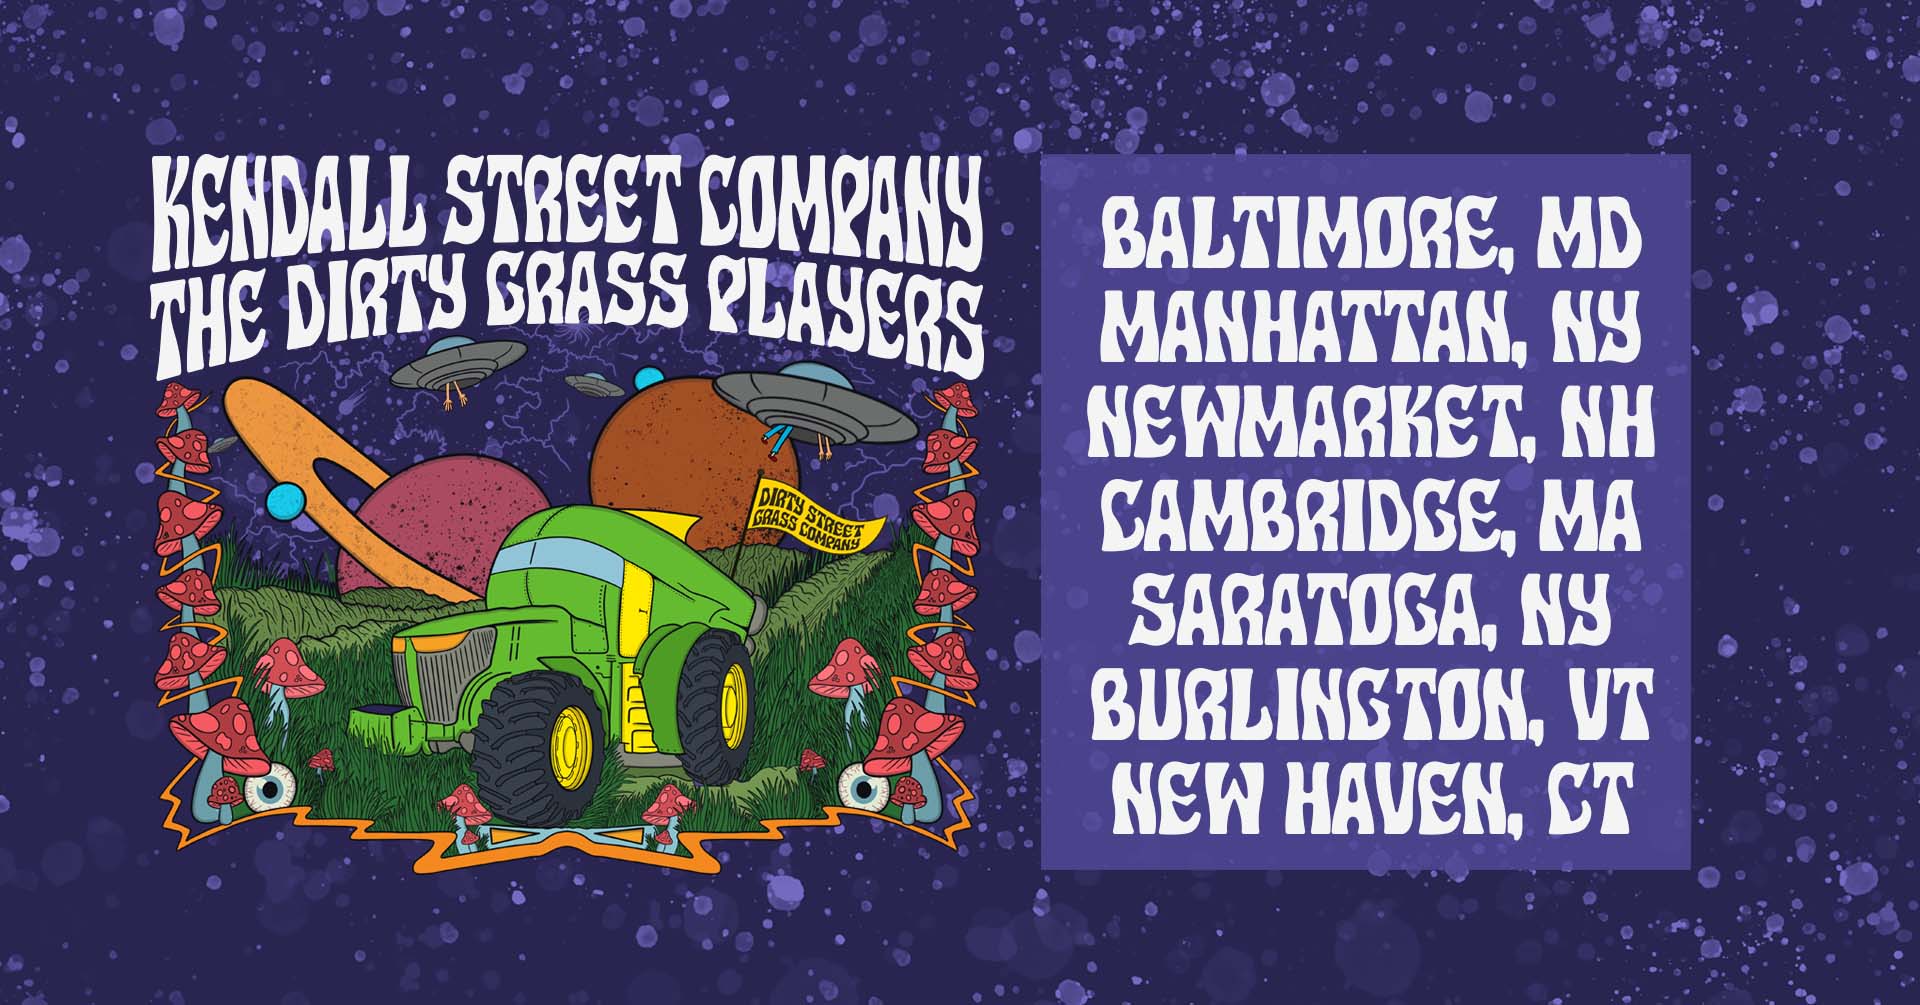 Kendall Street Company & The Dirty Grass Players Announce Winter 2021 Tour Dates